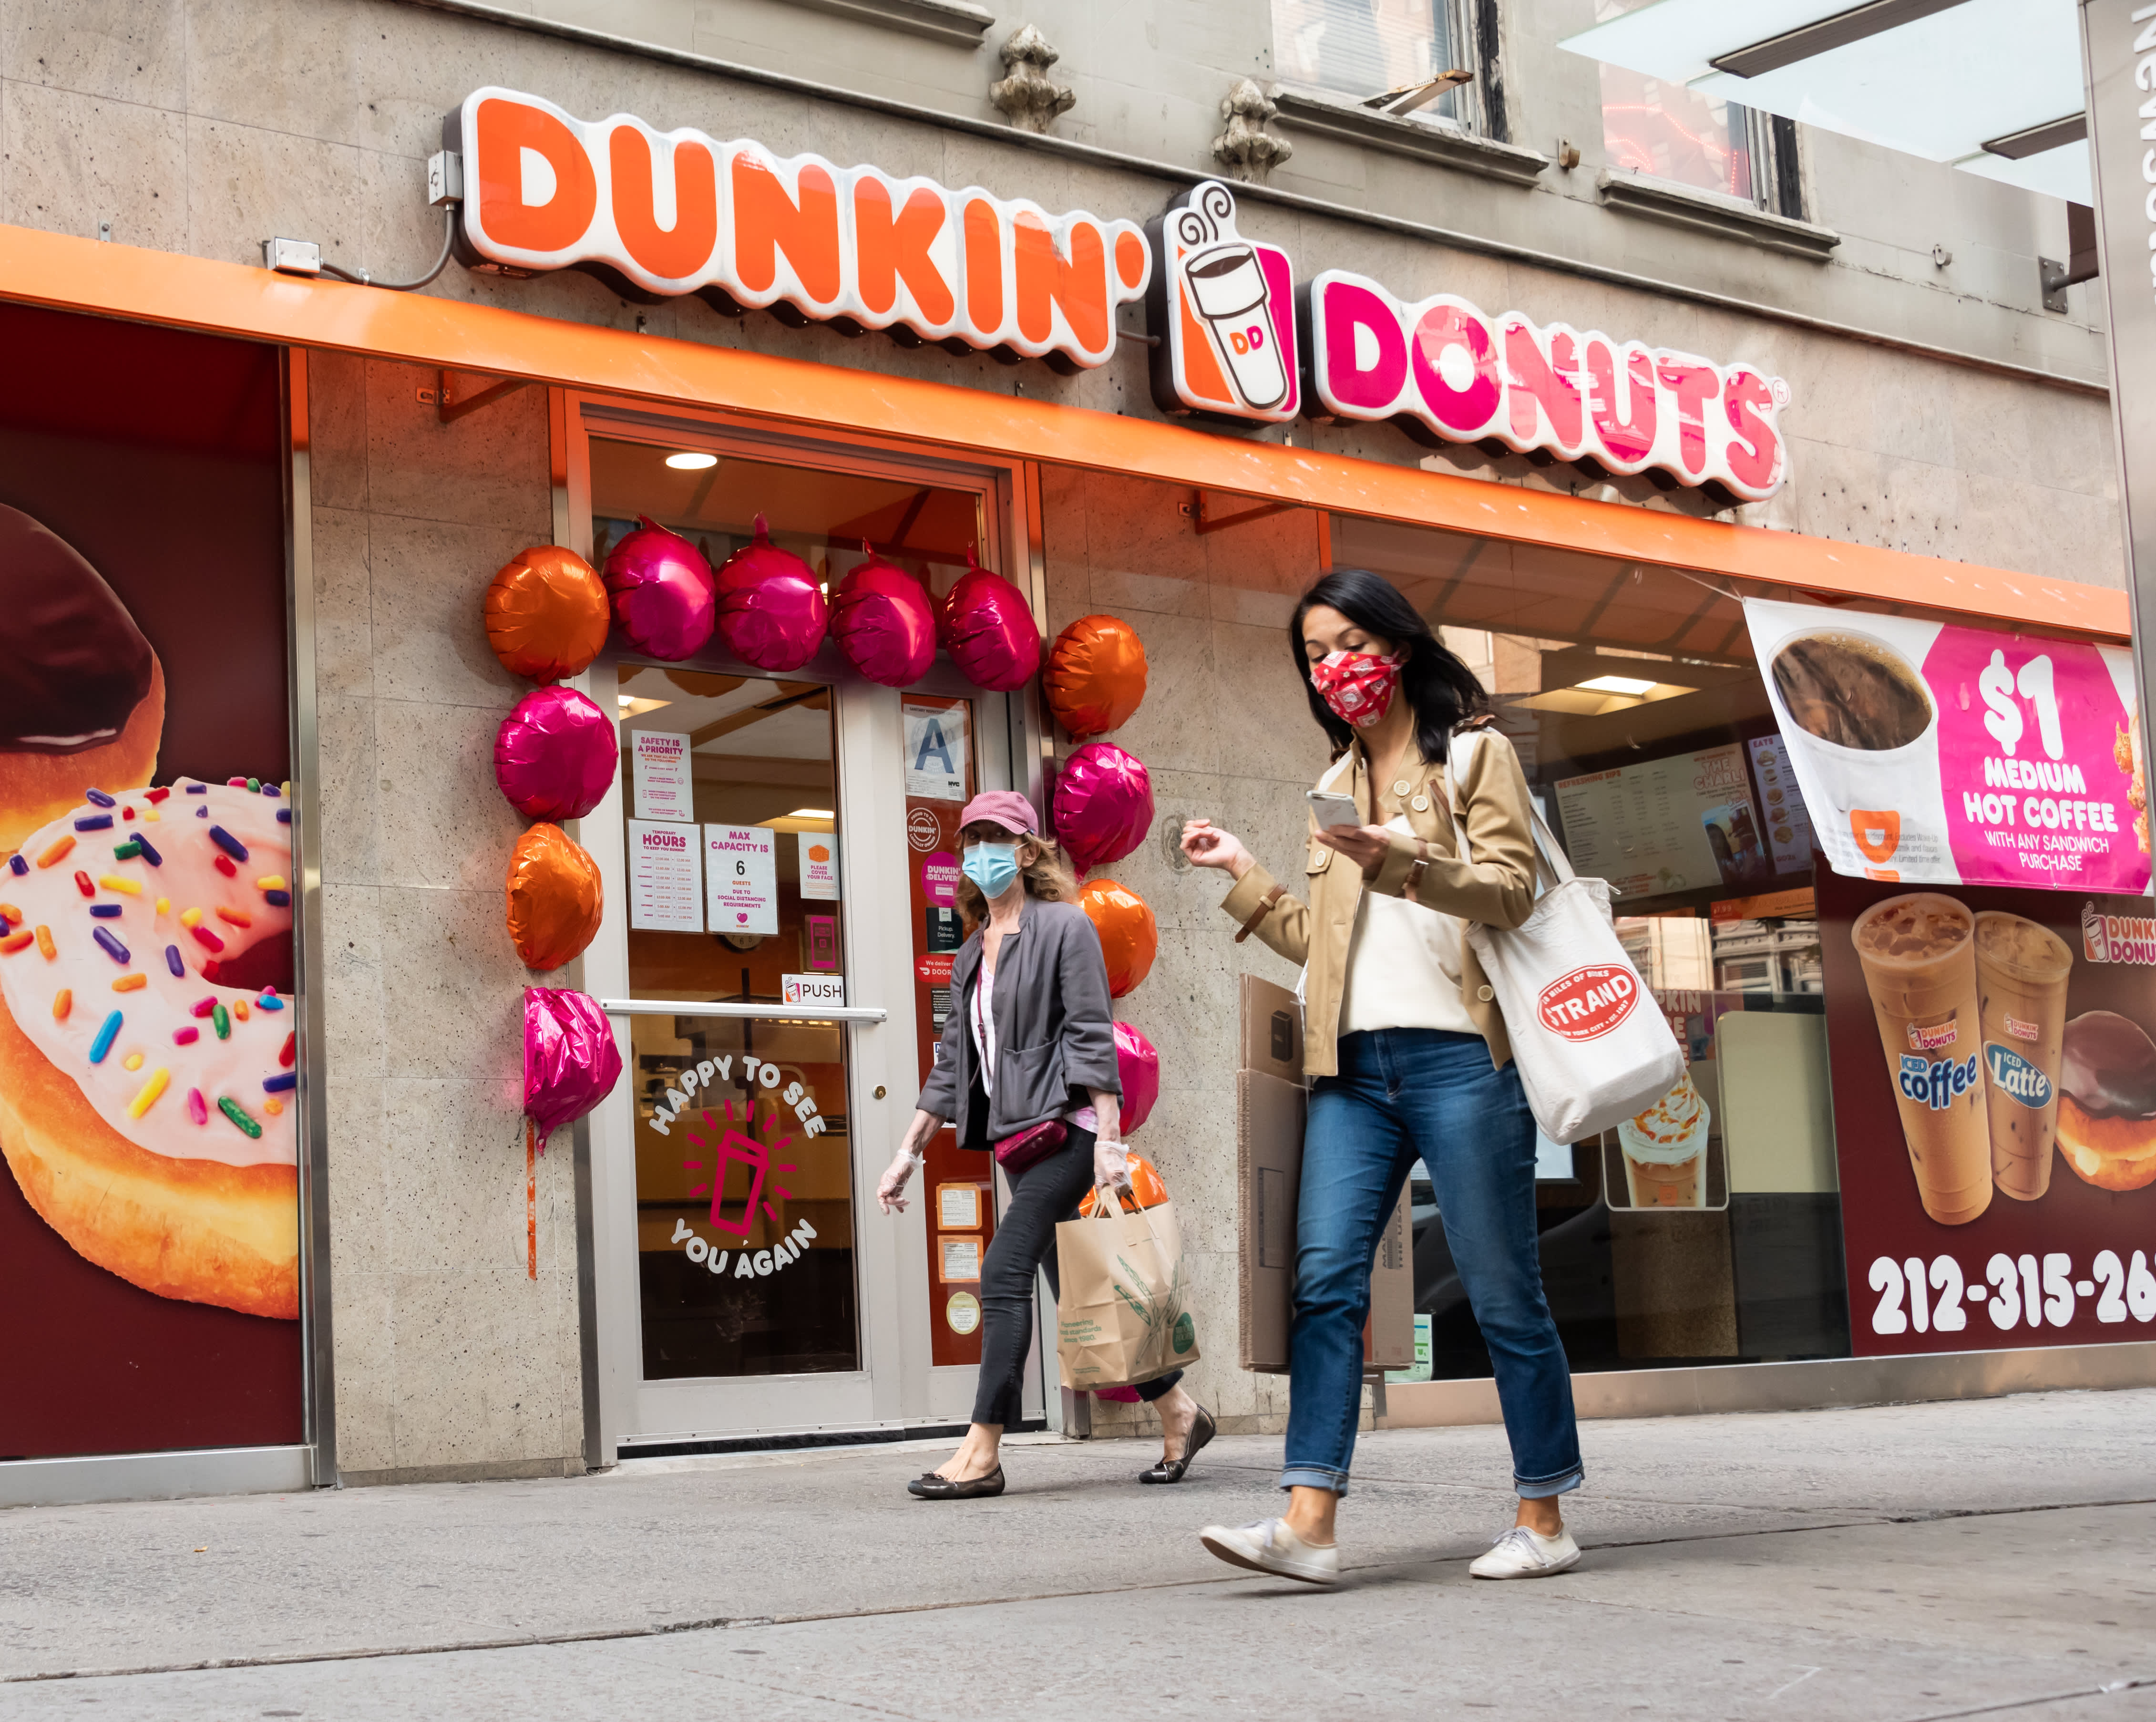 Dunkin' Brands is discussing potential sale to Inspire Brands - CNBC